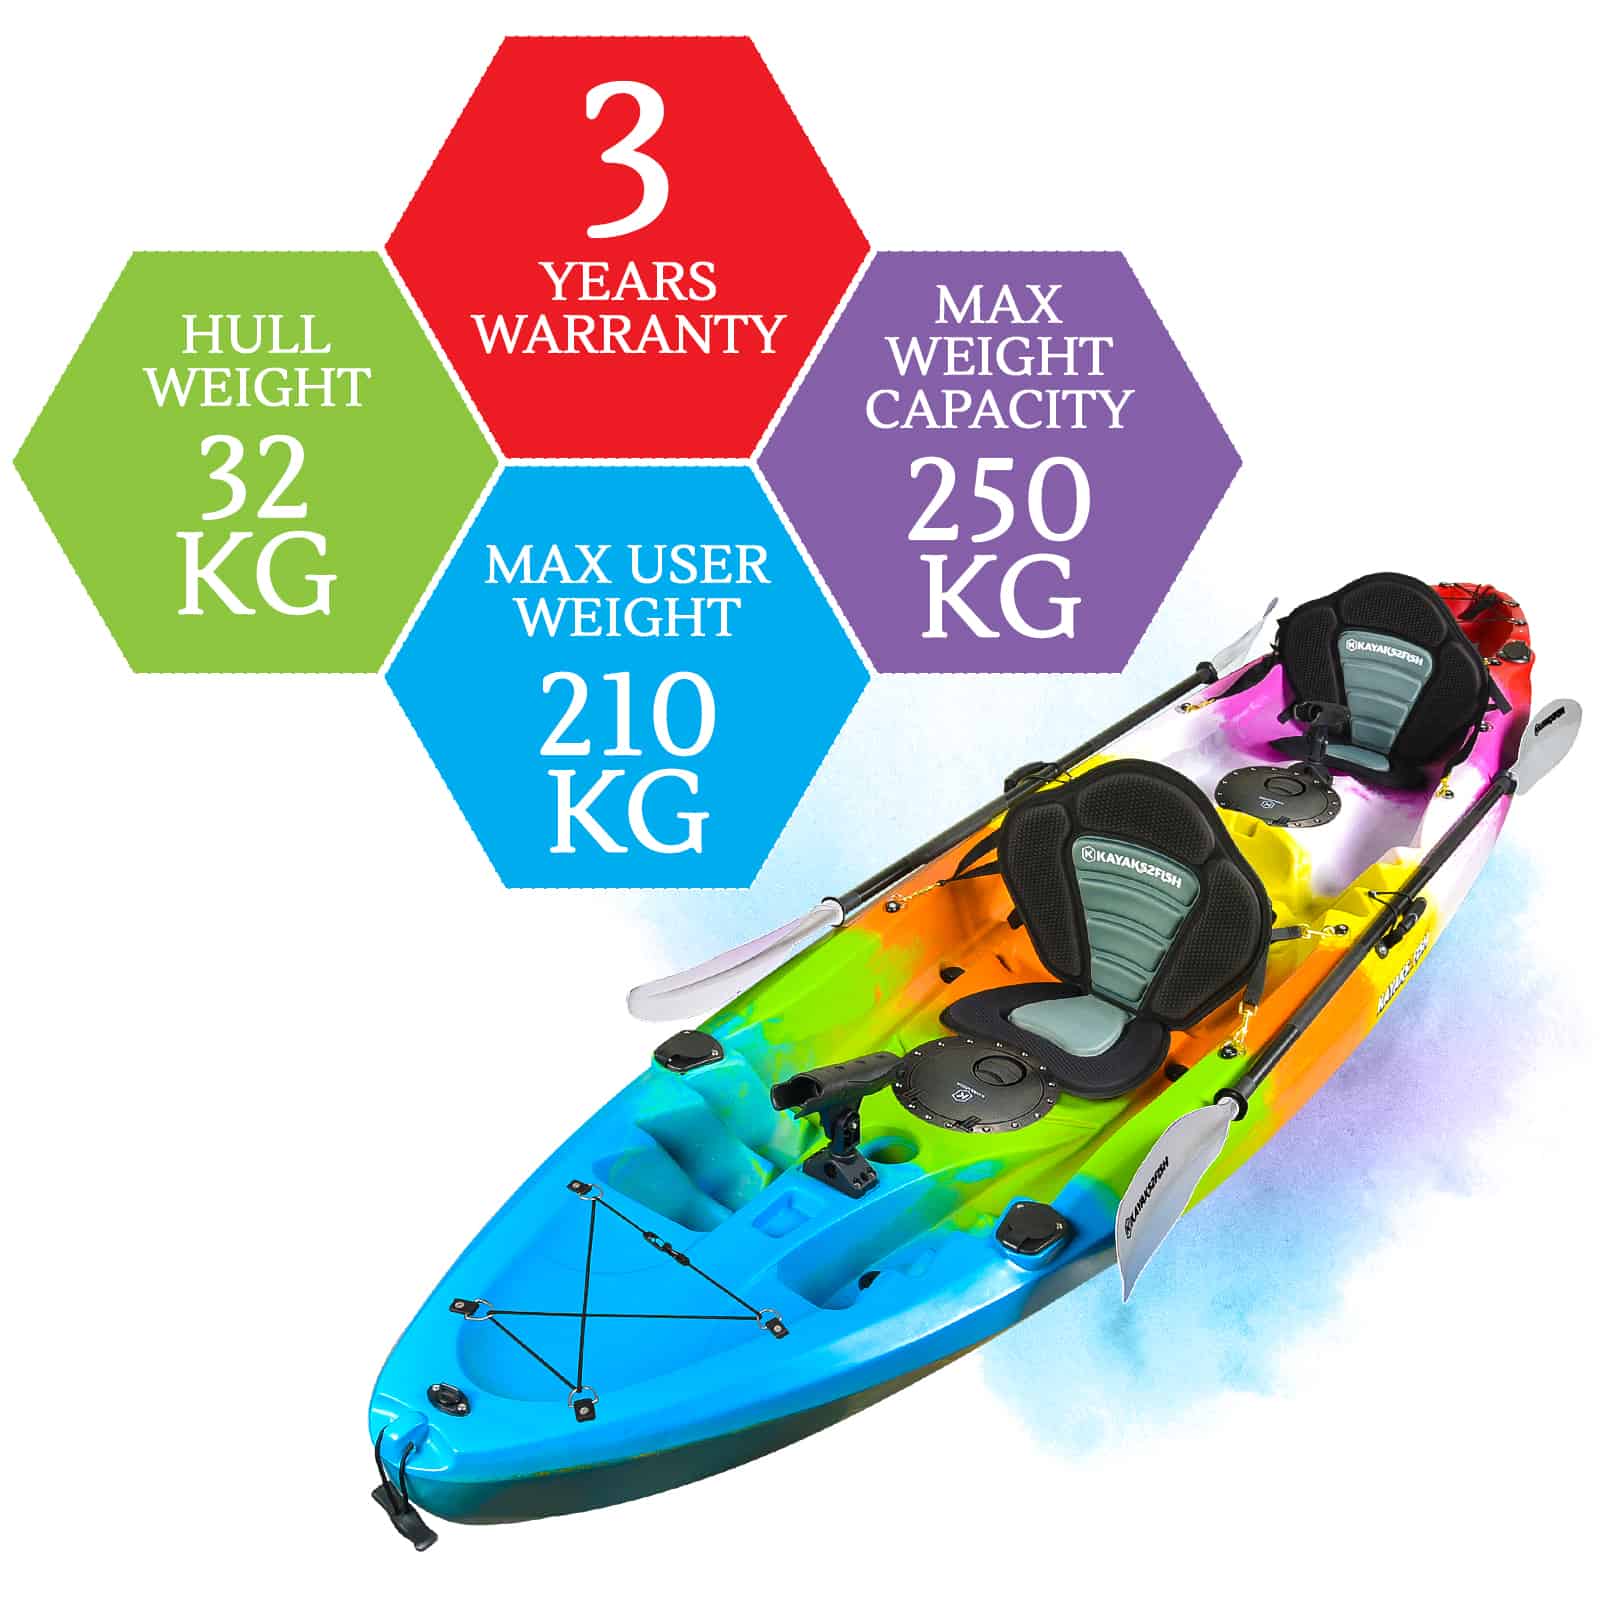 K2FS-EAGLE-RAINBOW specifications